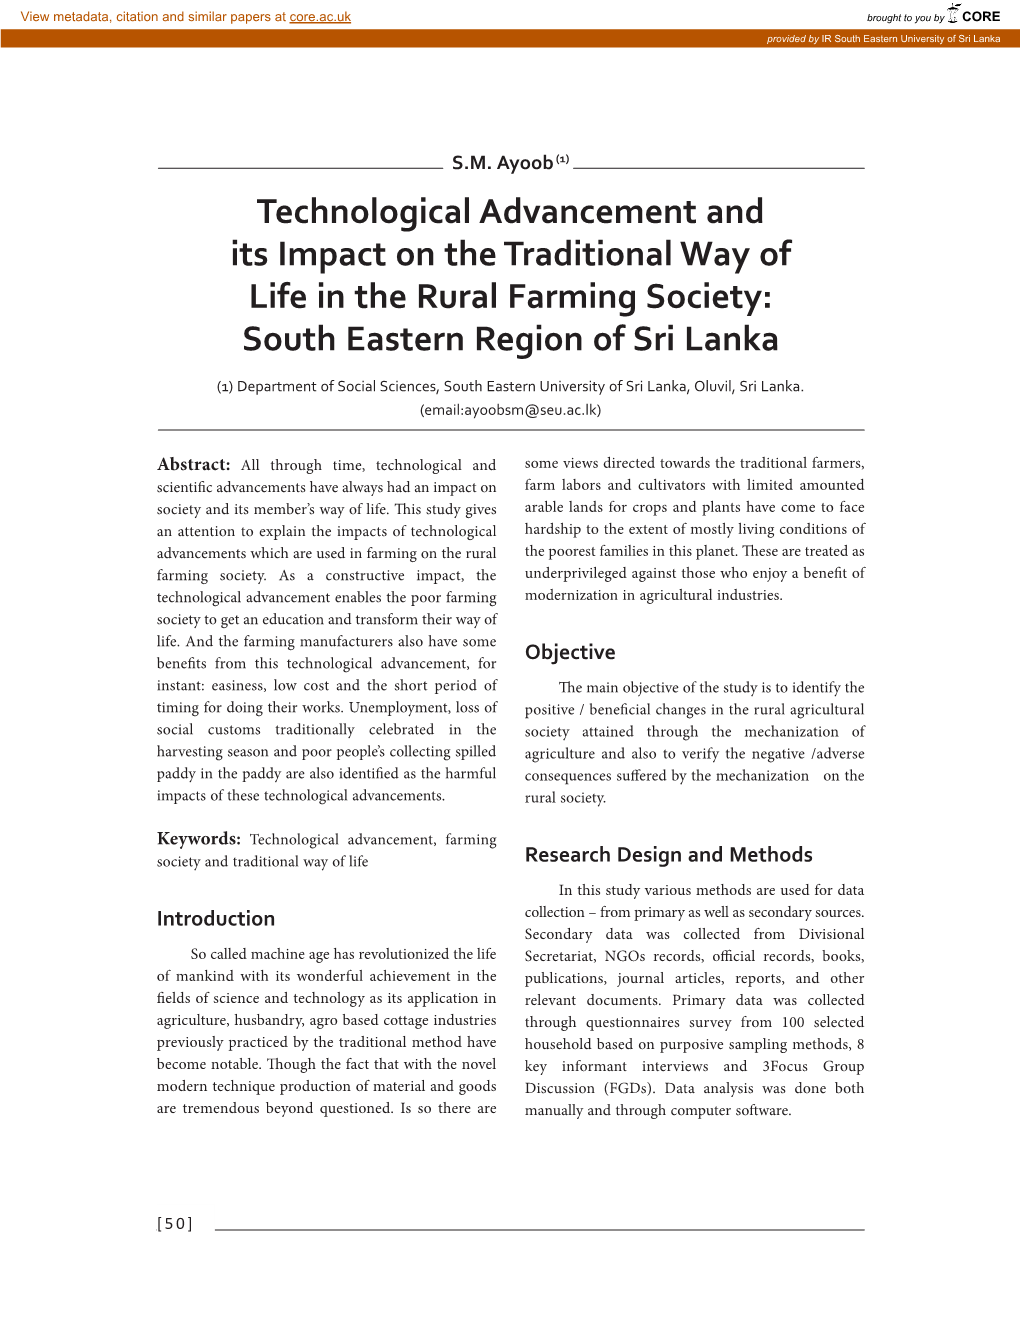 Technological Advancement and Its Impact on the Traditional Way of Life in the Rural Farming Society: South Eastern Region of Sri Lanka